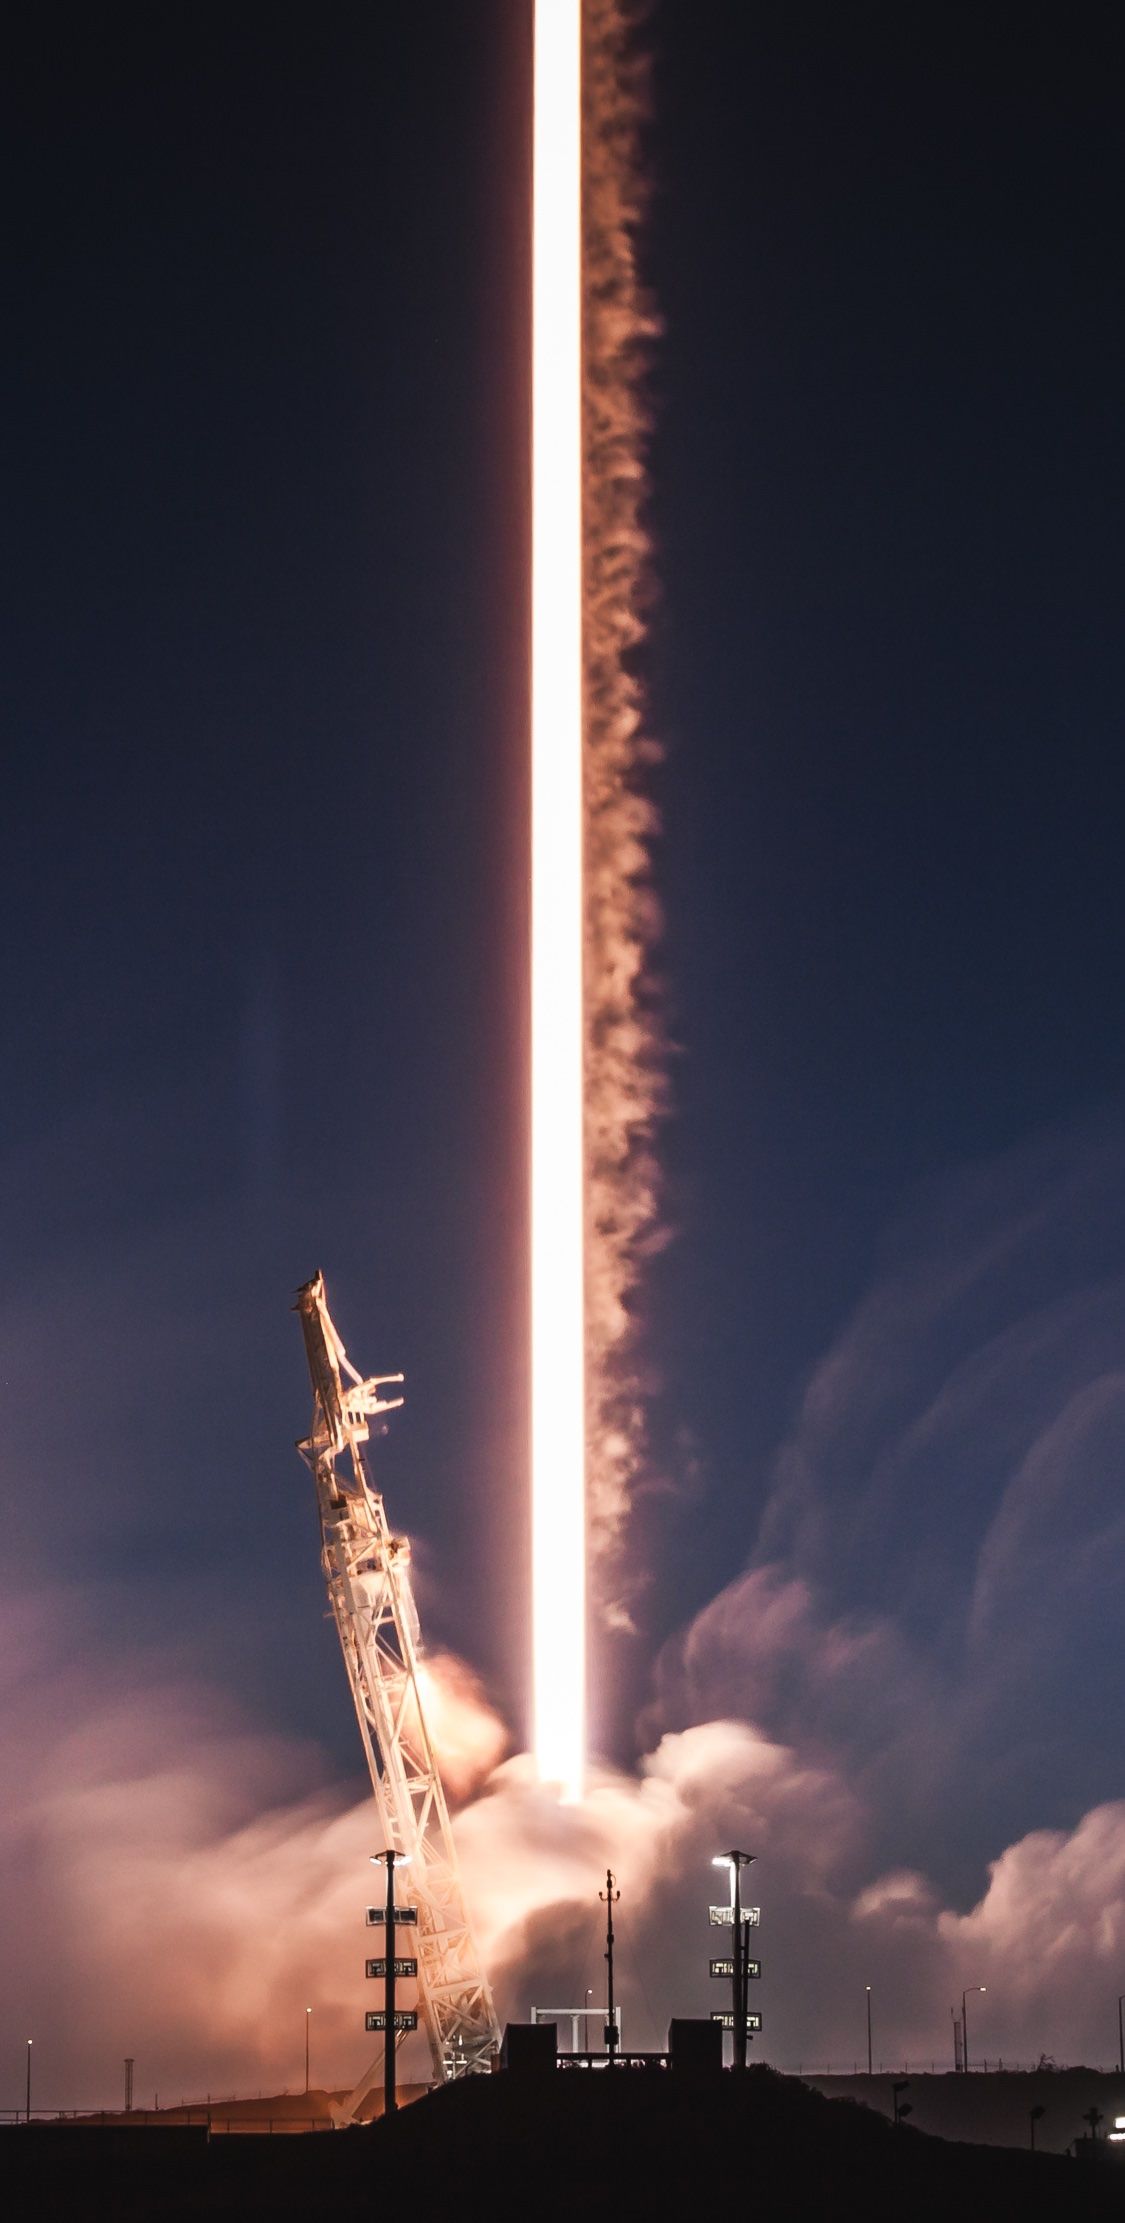 Amazing SpaceX Wallpaper for iPhone 11 (Ep. 12)